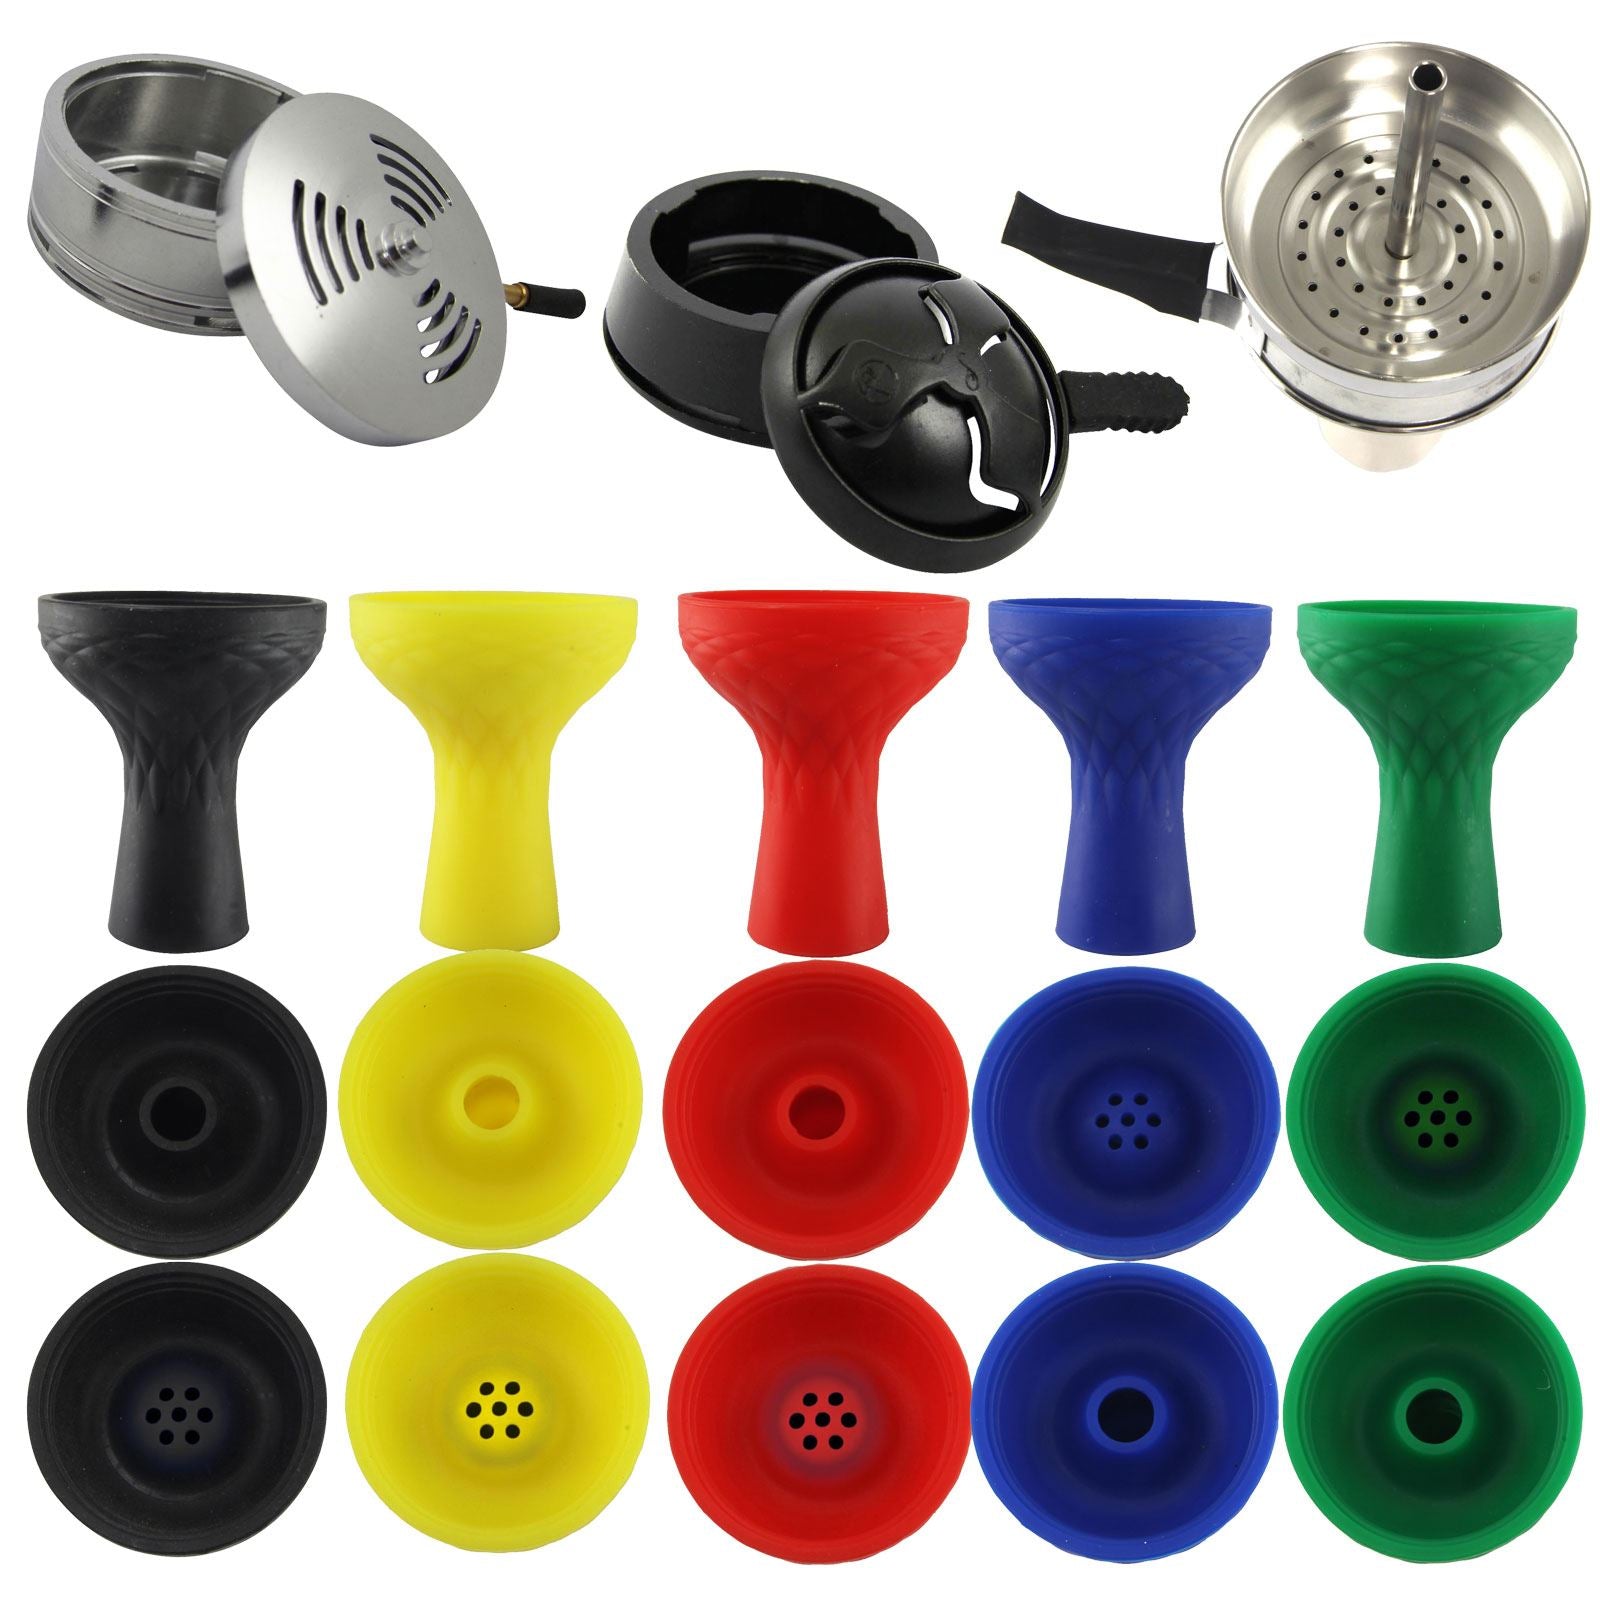 Silicone Bowls in Phunnel or Super Chief with Heat Management